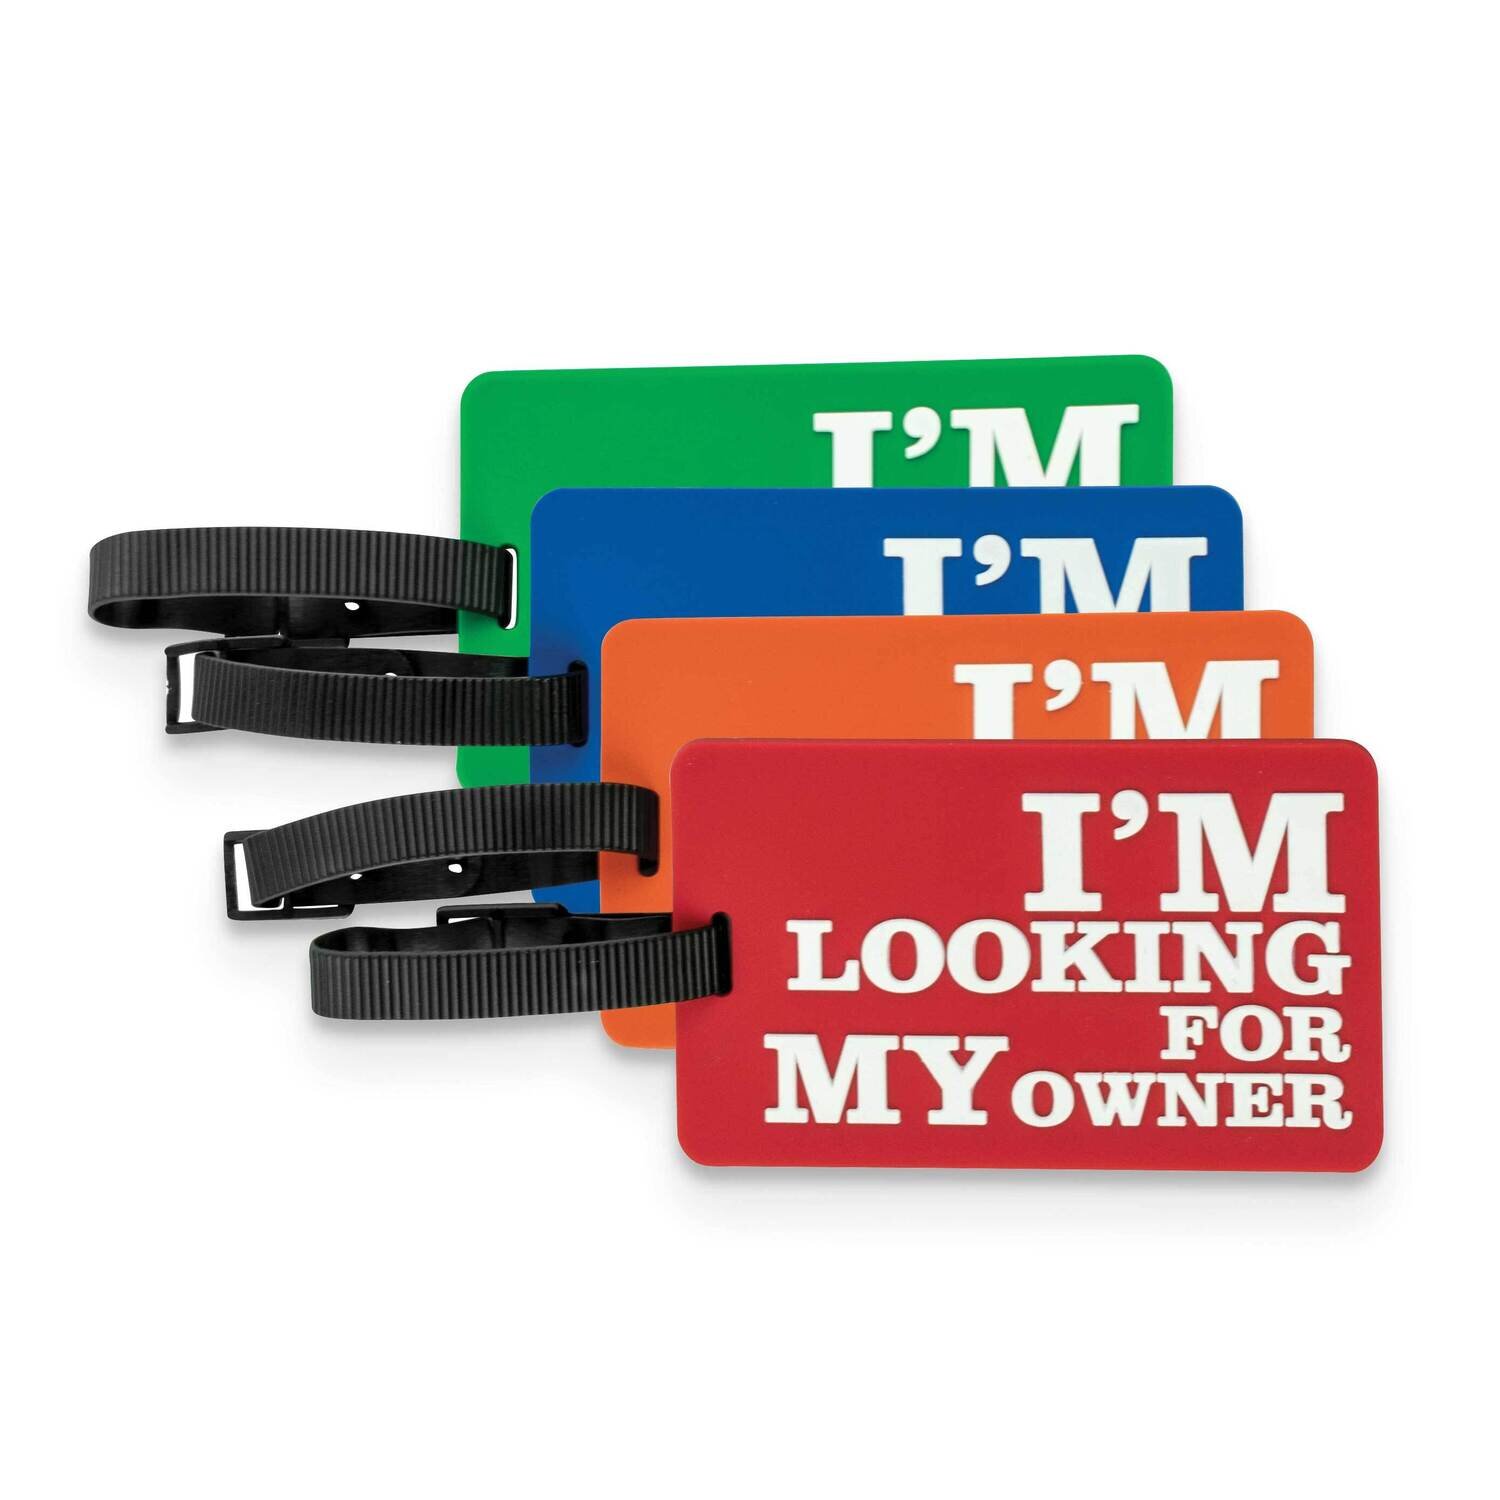 4-Piece Looking For Owner Luggage Tag Set GM22558